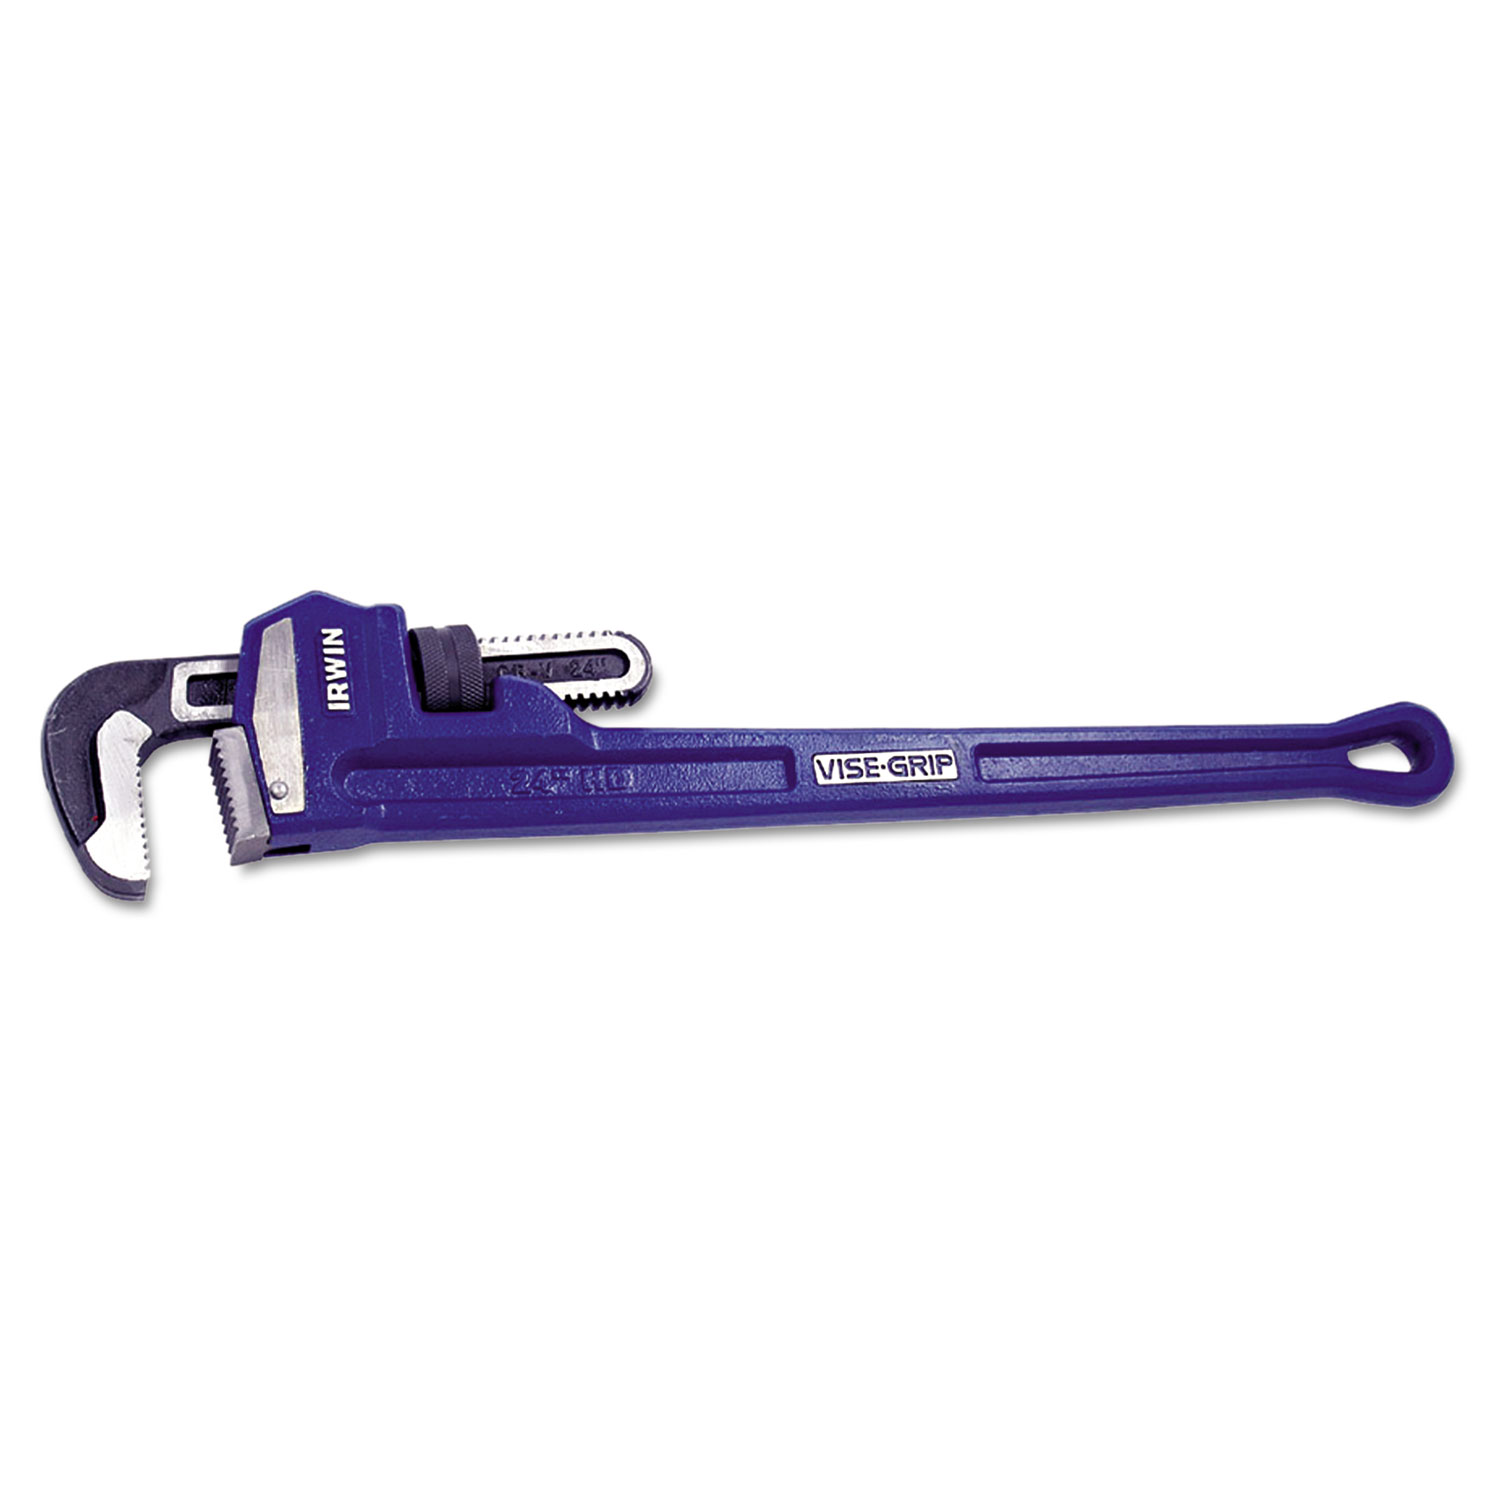 IRWIN VISE-GRIP Cast Iron Pipe Wrench, 24 Long, 3 Jaw Capacity